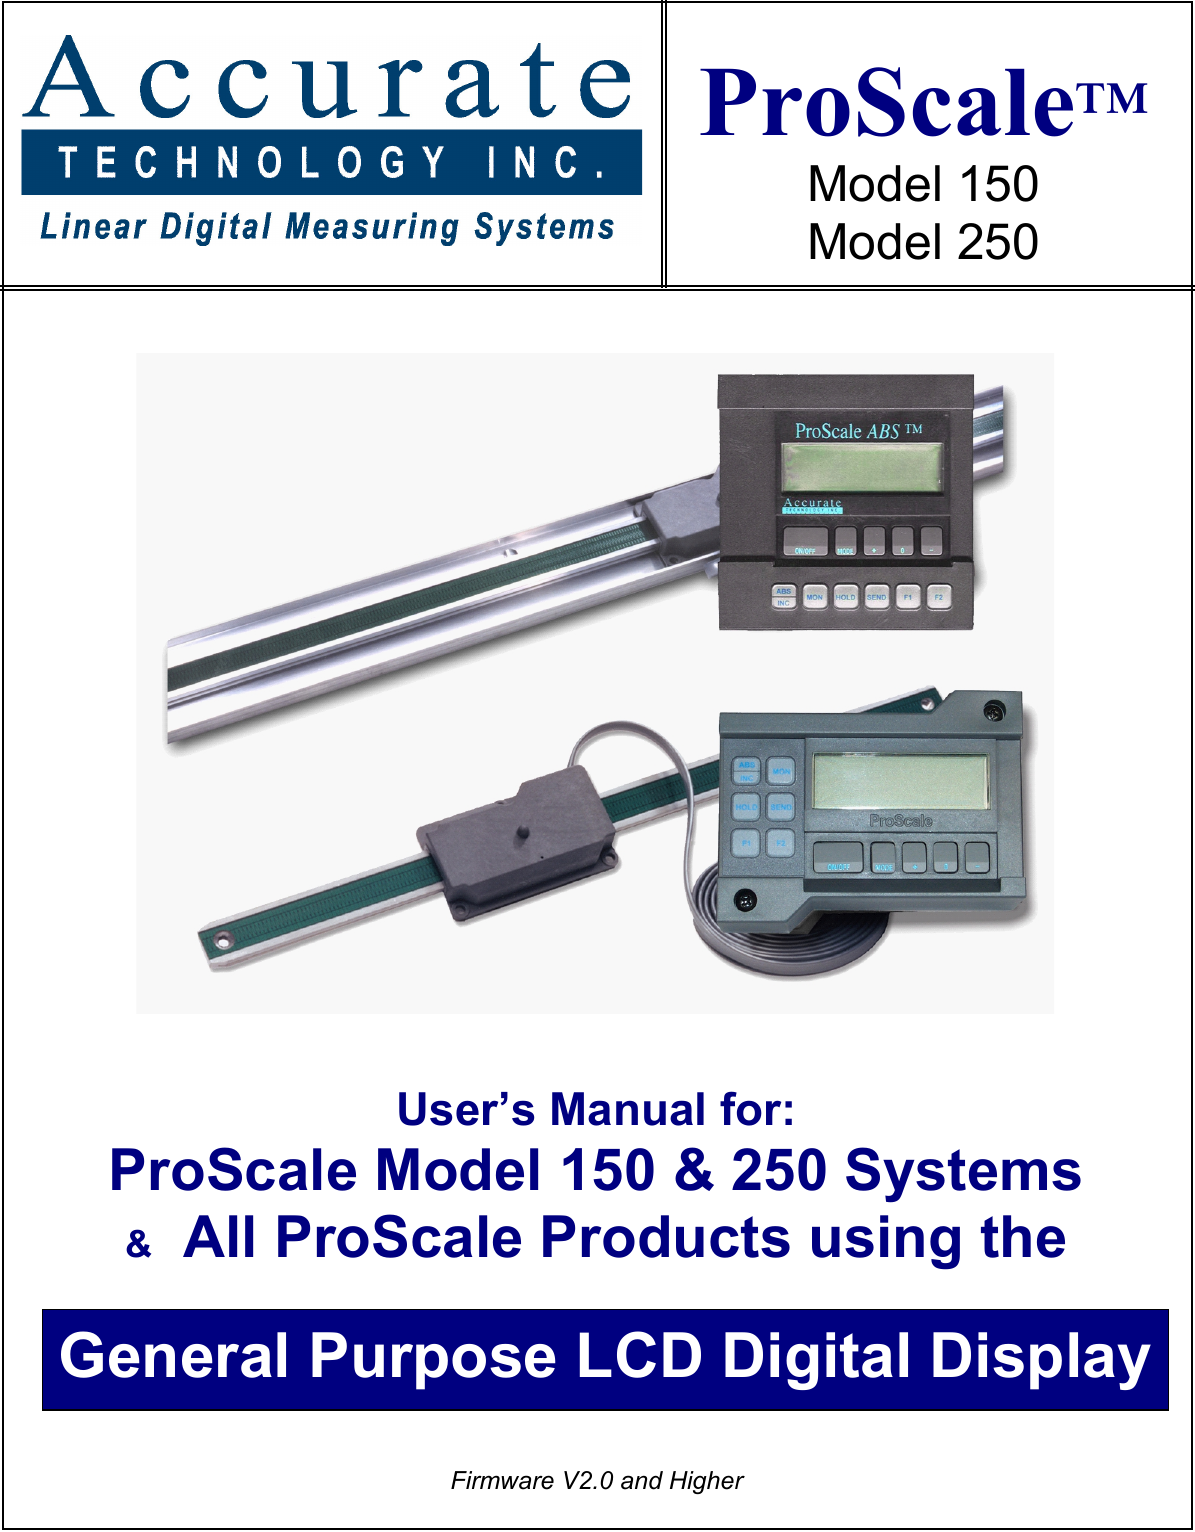                                                   User’s Manual for: ProScale Model 150 &amp; 250 Systems  &amp;   All ProScale Products using the    Firmware V2.0 and Higher   ProScale™ Model 150 Model 250 General Purpose LCD Digital Display 